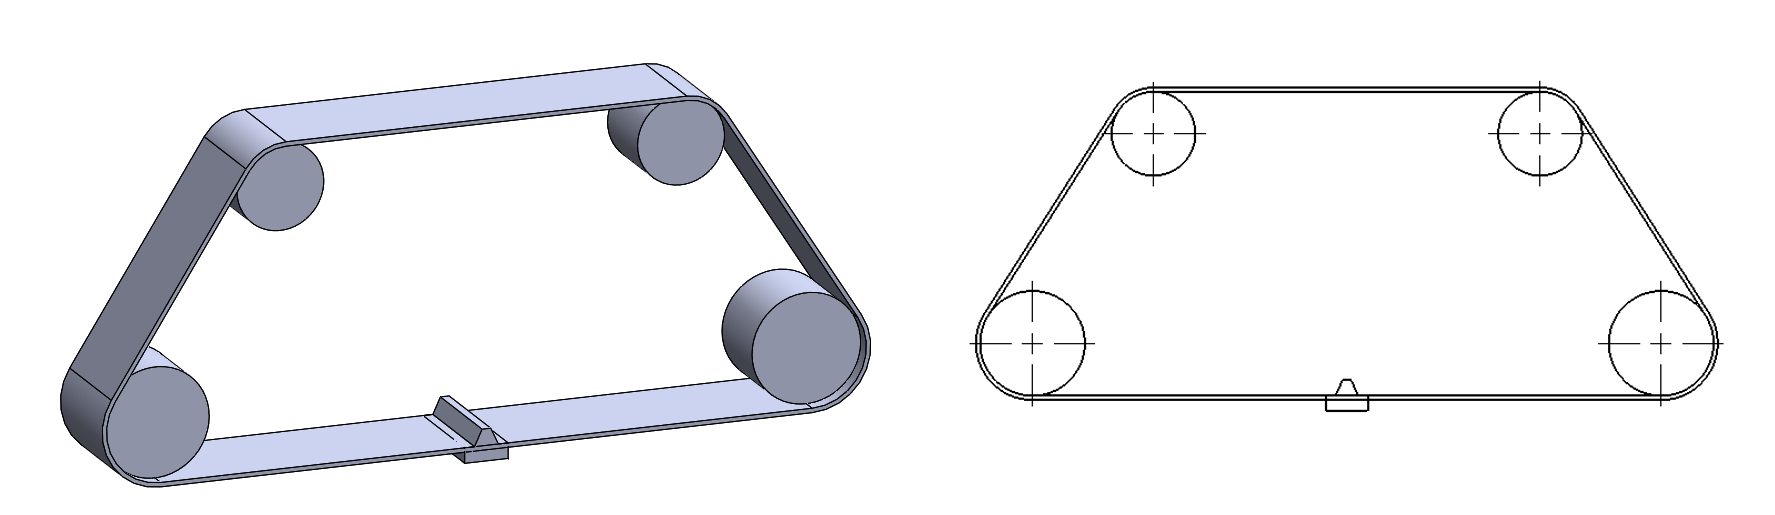 SOLIDWORKS Drawing1